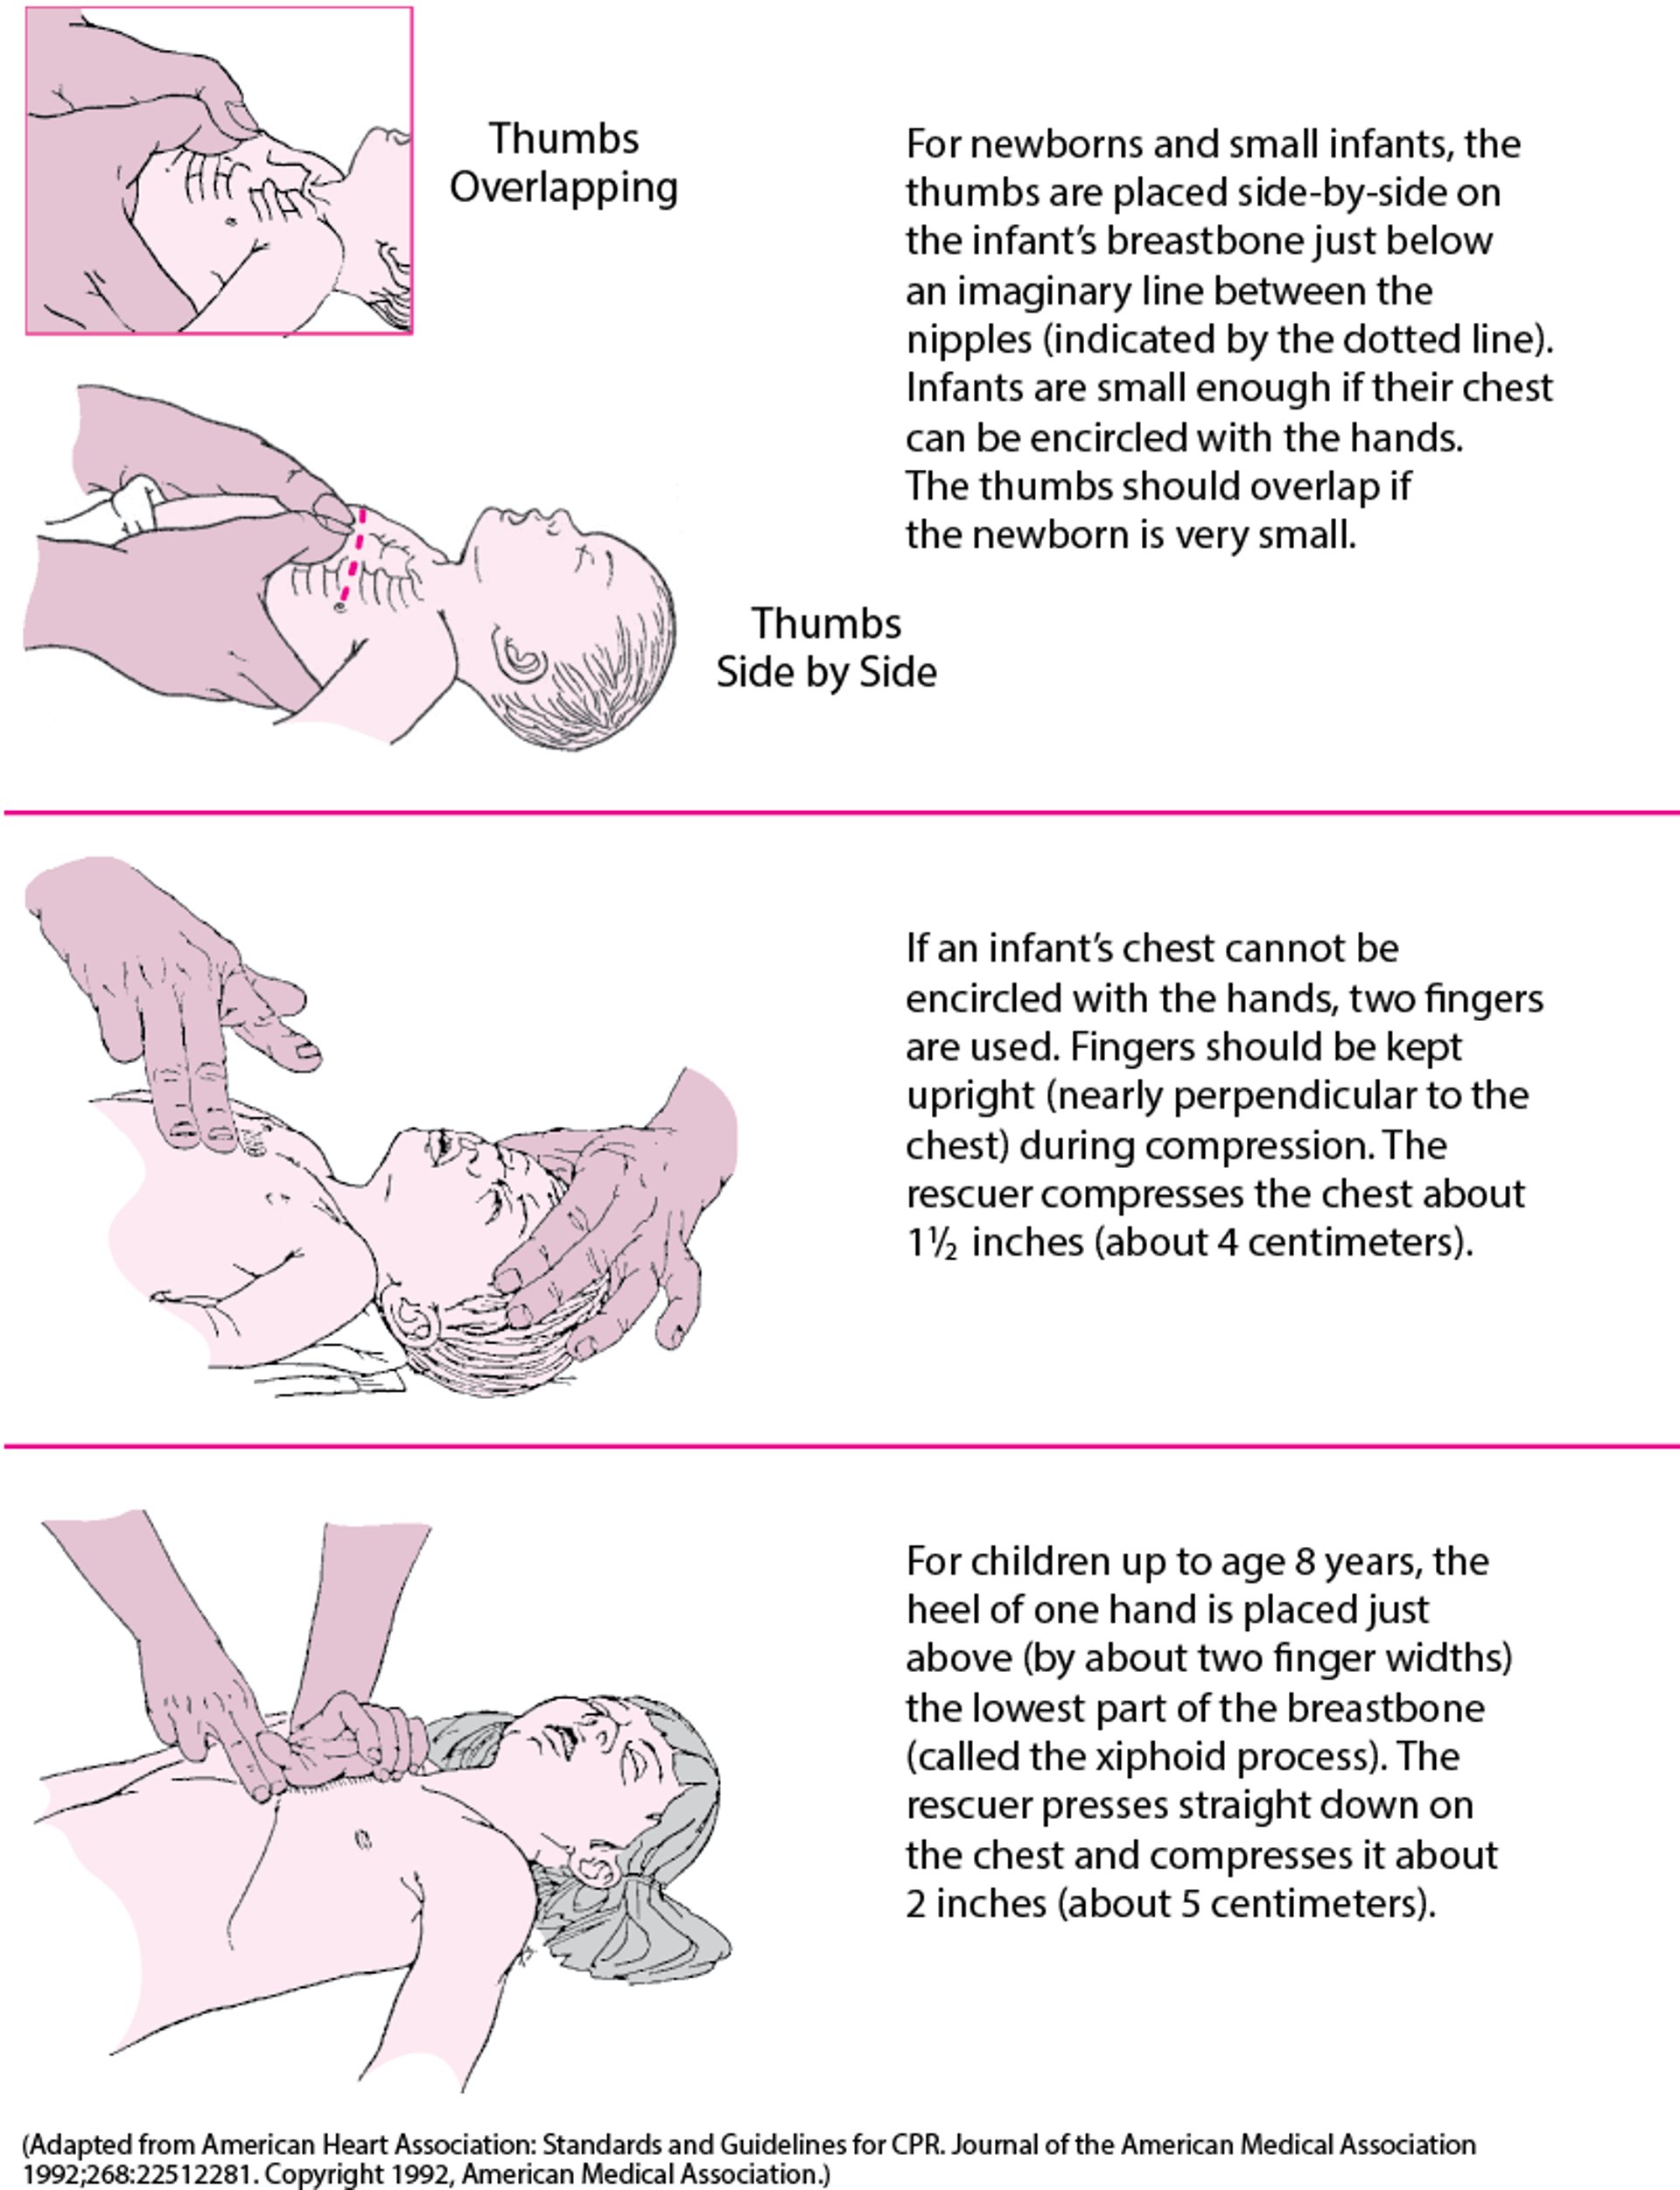 Doing Chest Compressions in an Infant